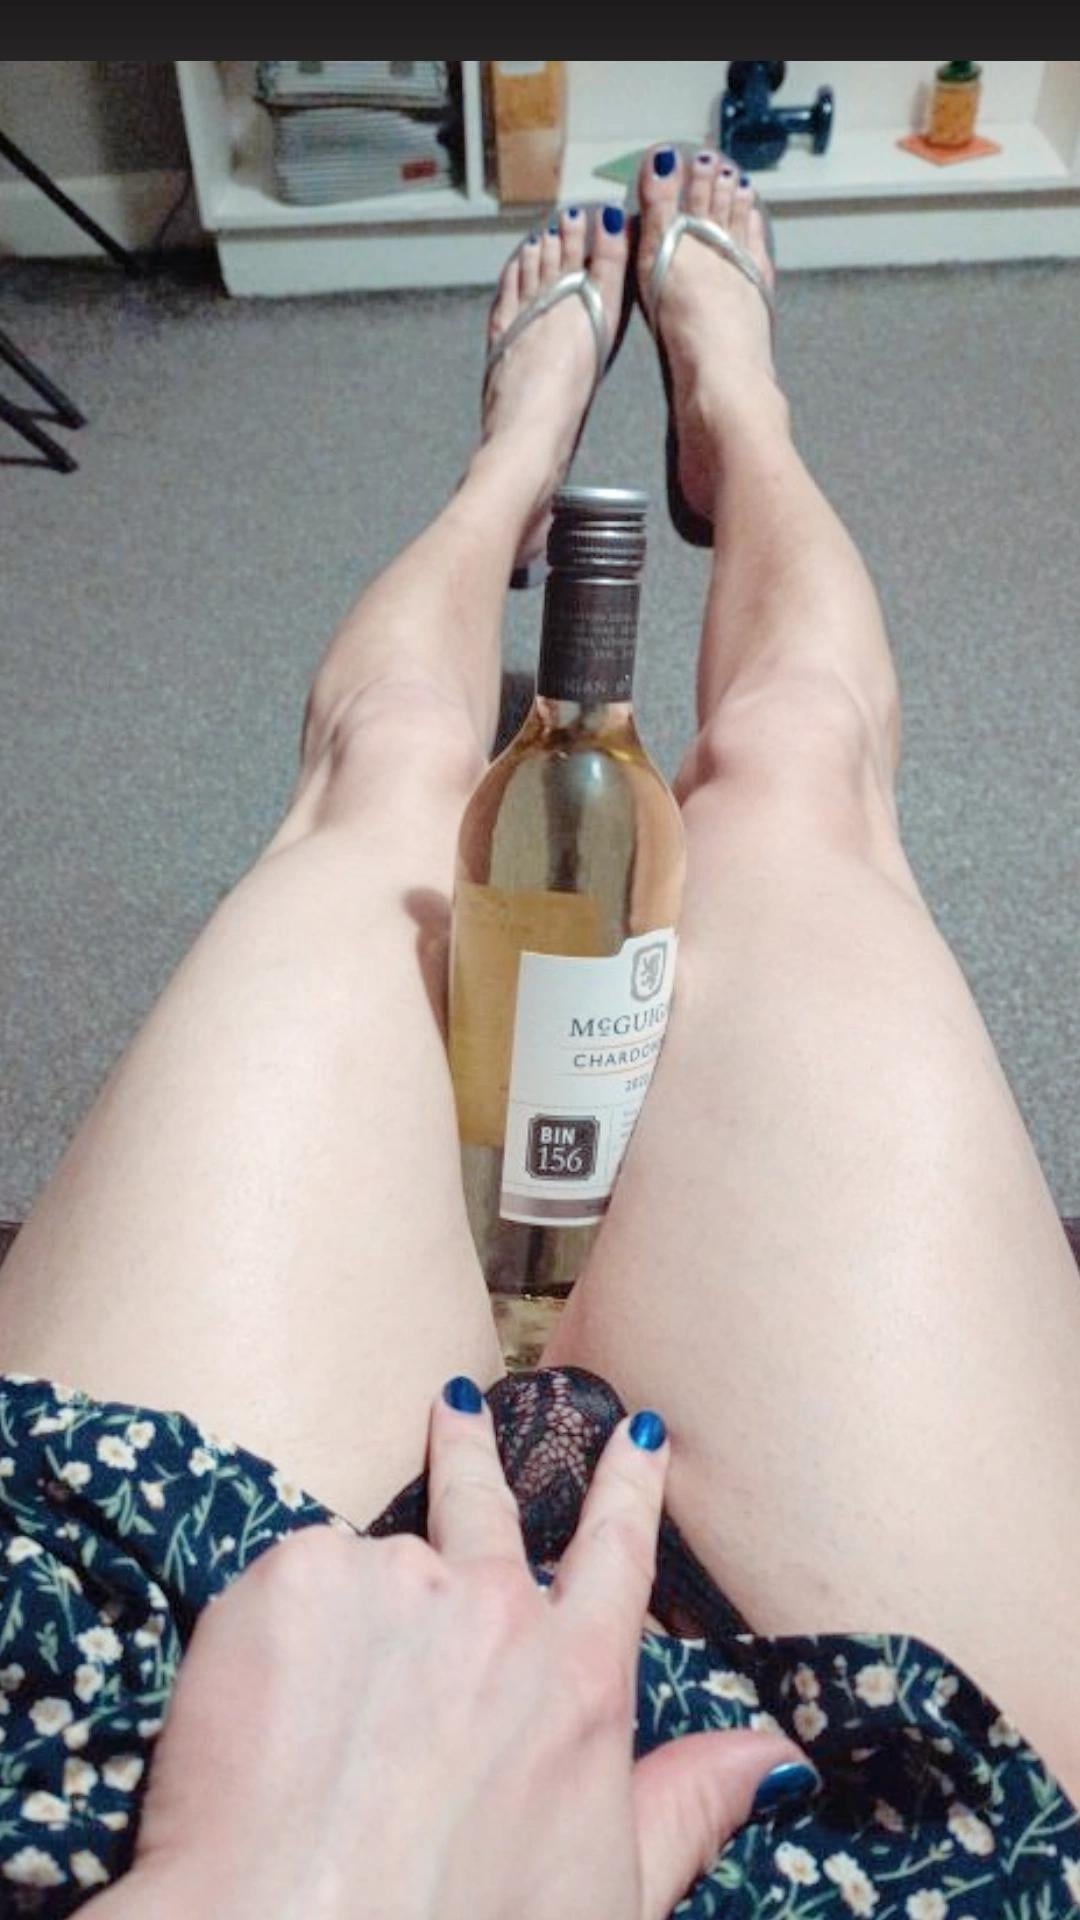 Would you prefer some wine or Trap milk? 133ma2b - transexual woman